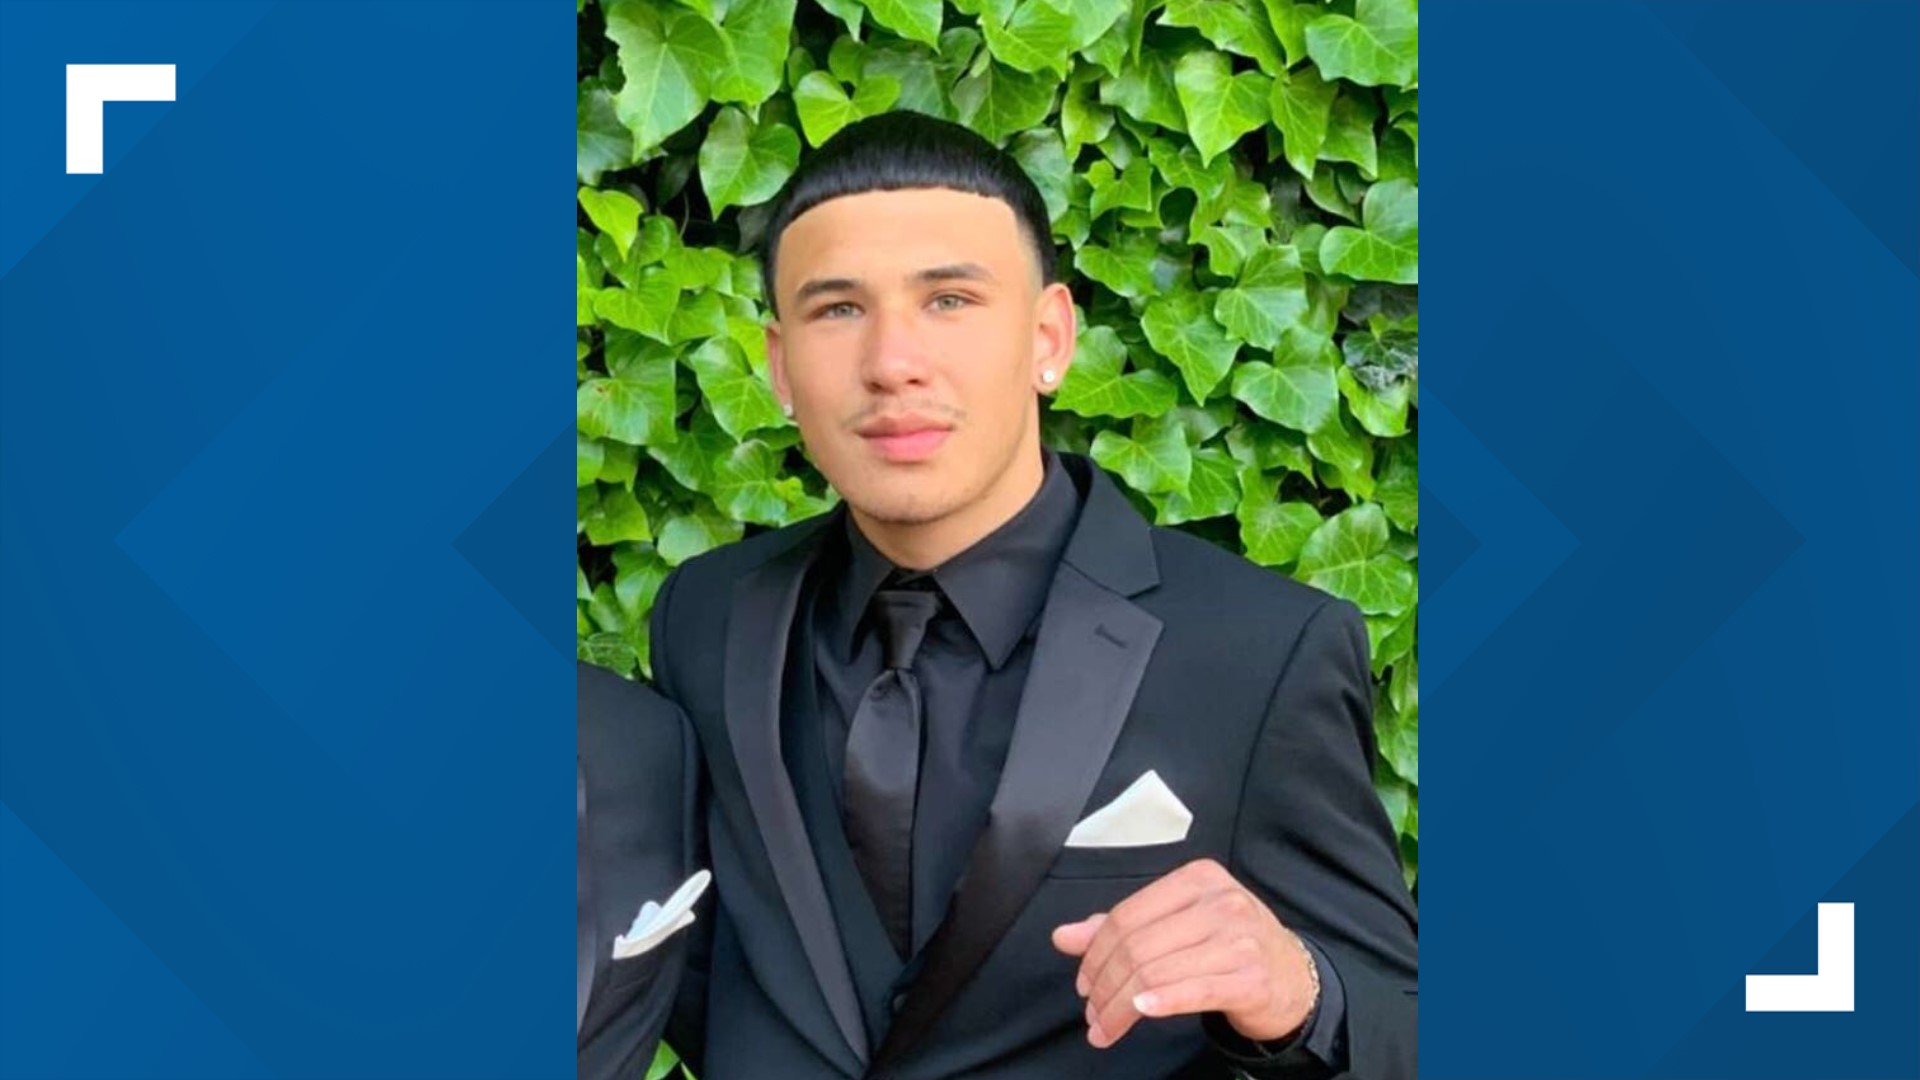 A 17-year-old boy was killed in Stockton after an early morning shooting on Sunday. His death marked the second over the course of the weekend.